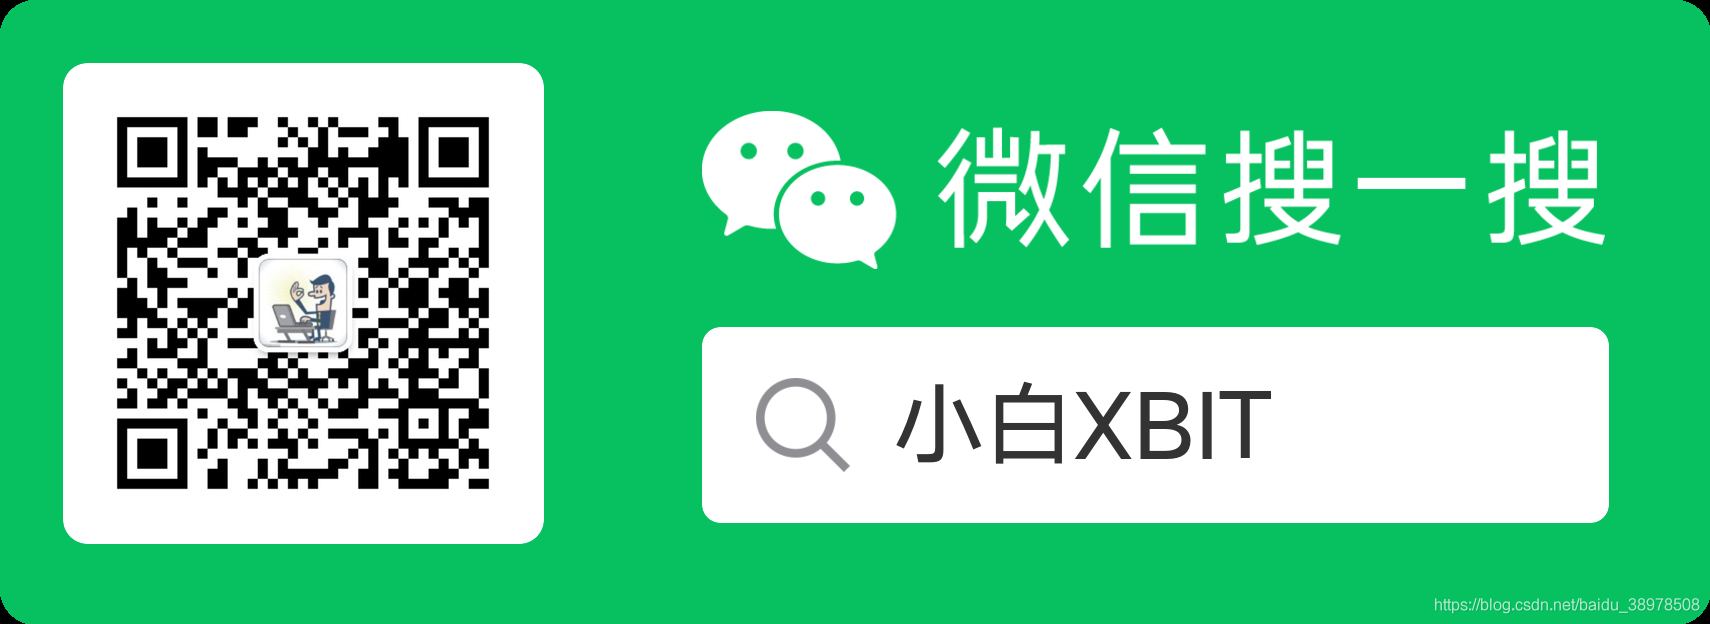 Use of WiFi module based on wechat applet